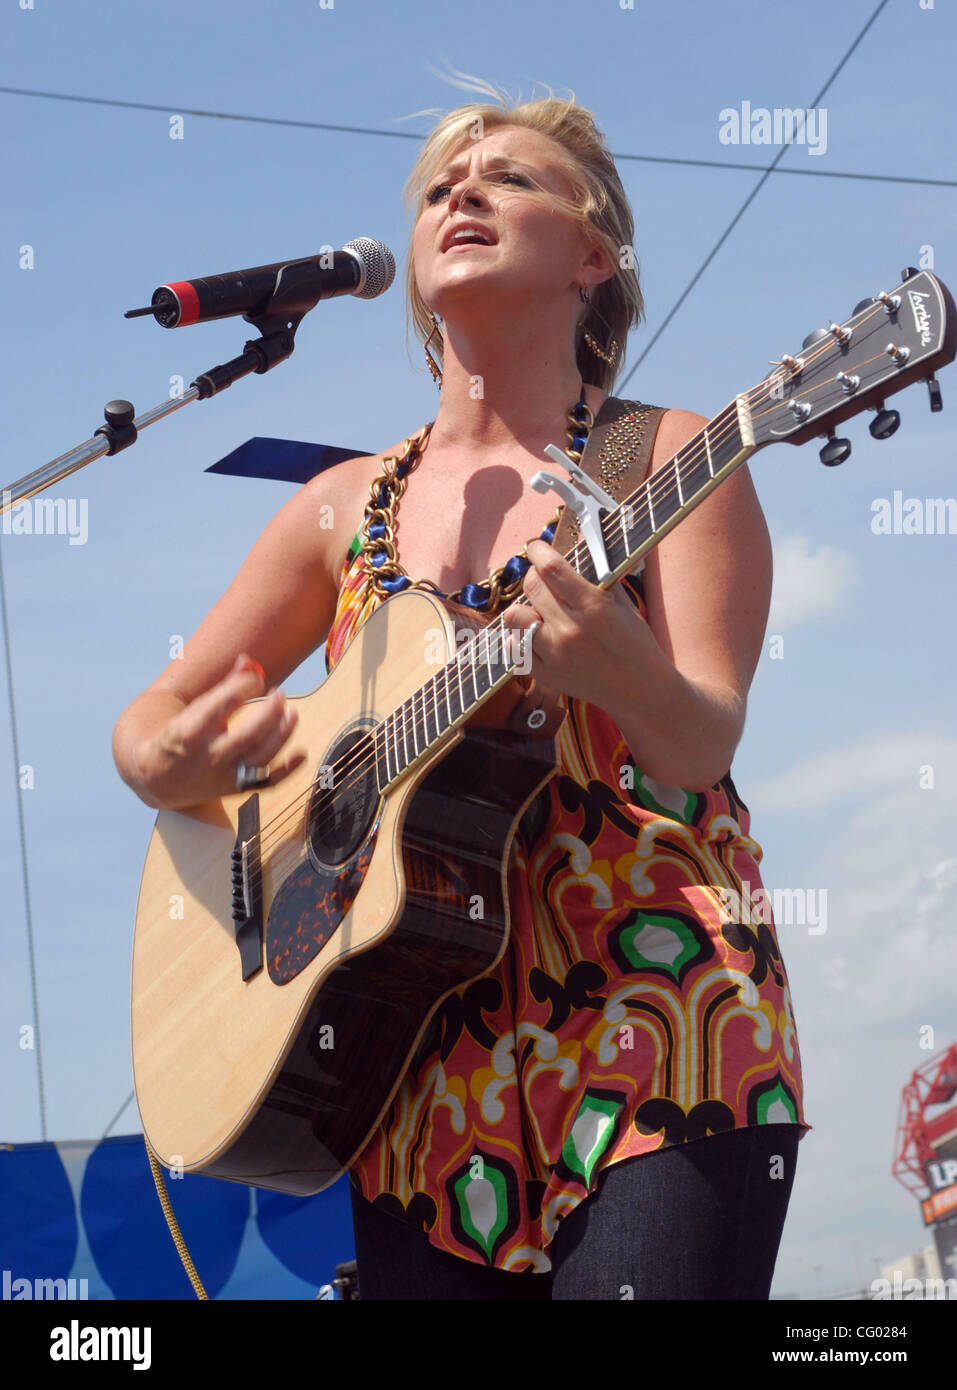 Jun 7, 2007  Nashville, TN; USA, Musician CAROLYN DAWN JOHNSON performs live at The Riverfront Stages as part of the 2007 CMA Music Festival.  The CMA Music Festival is the worlds largest country music festival the 4 day annual event takes place in downtown Nasvhille which is crowned Music City.  Fa Stock Photo